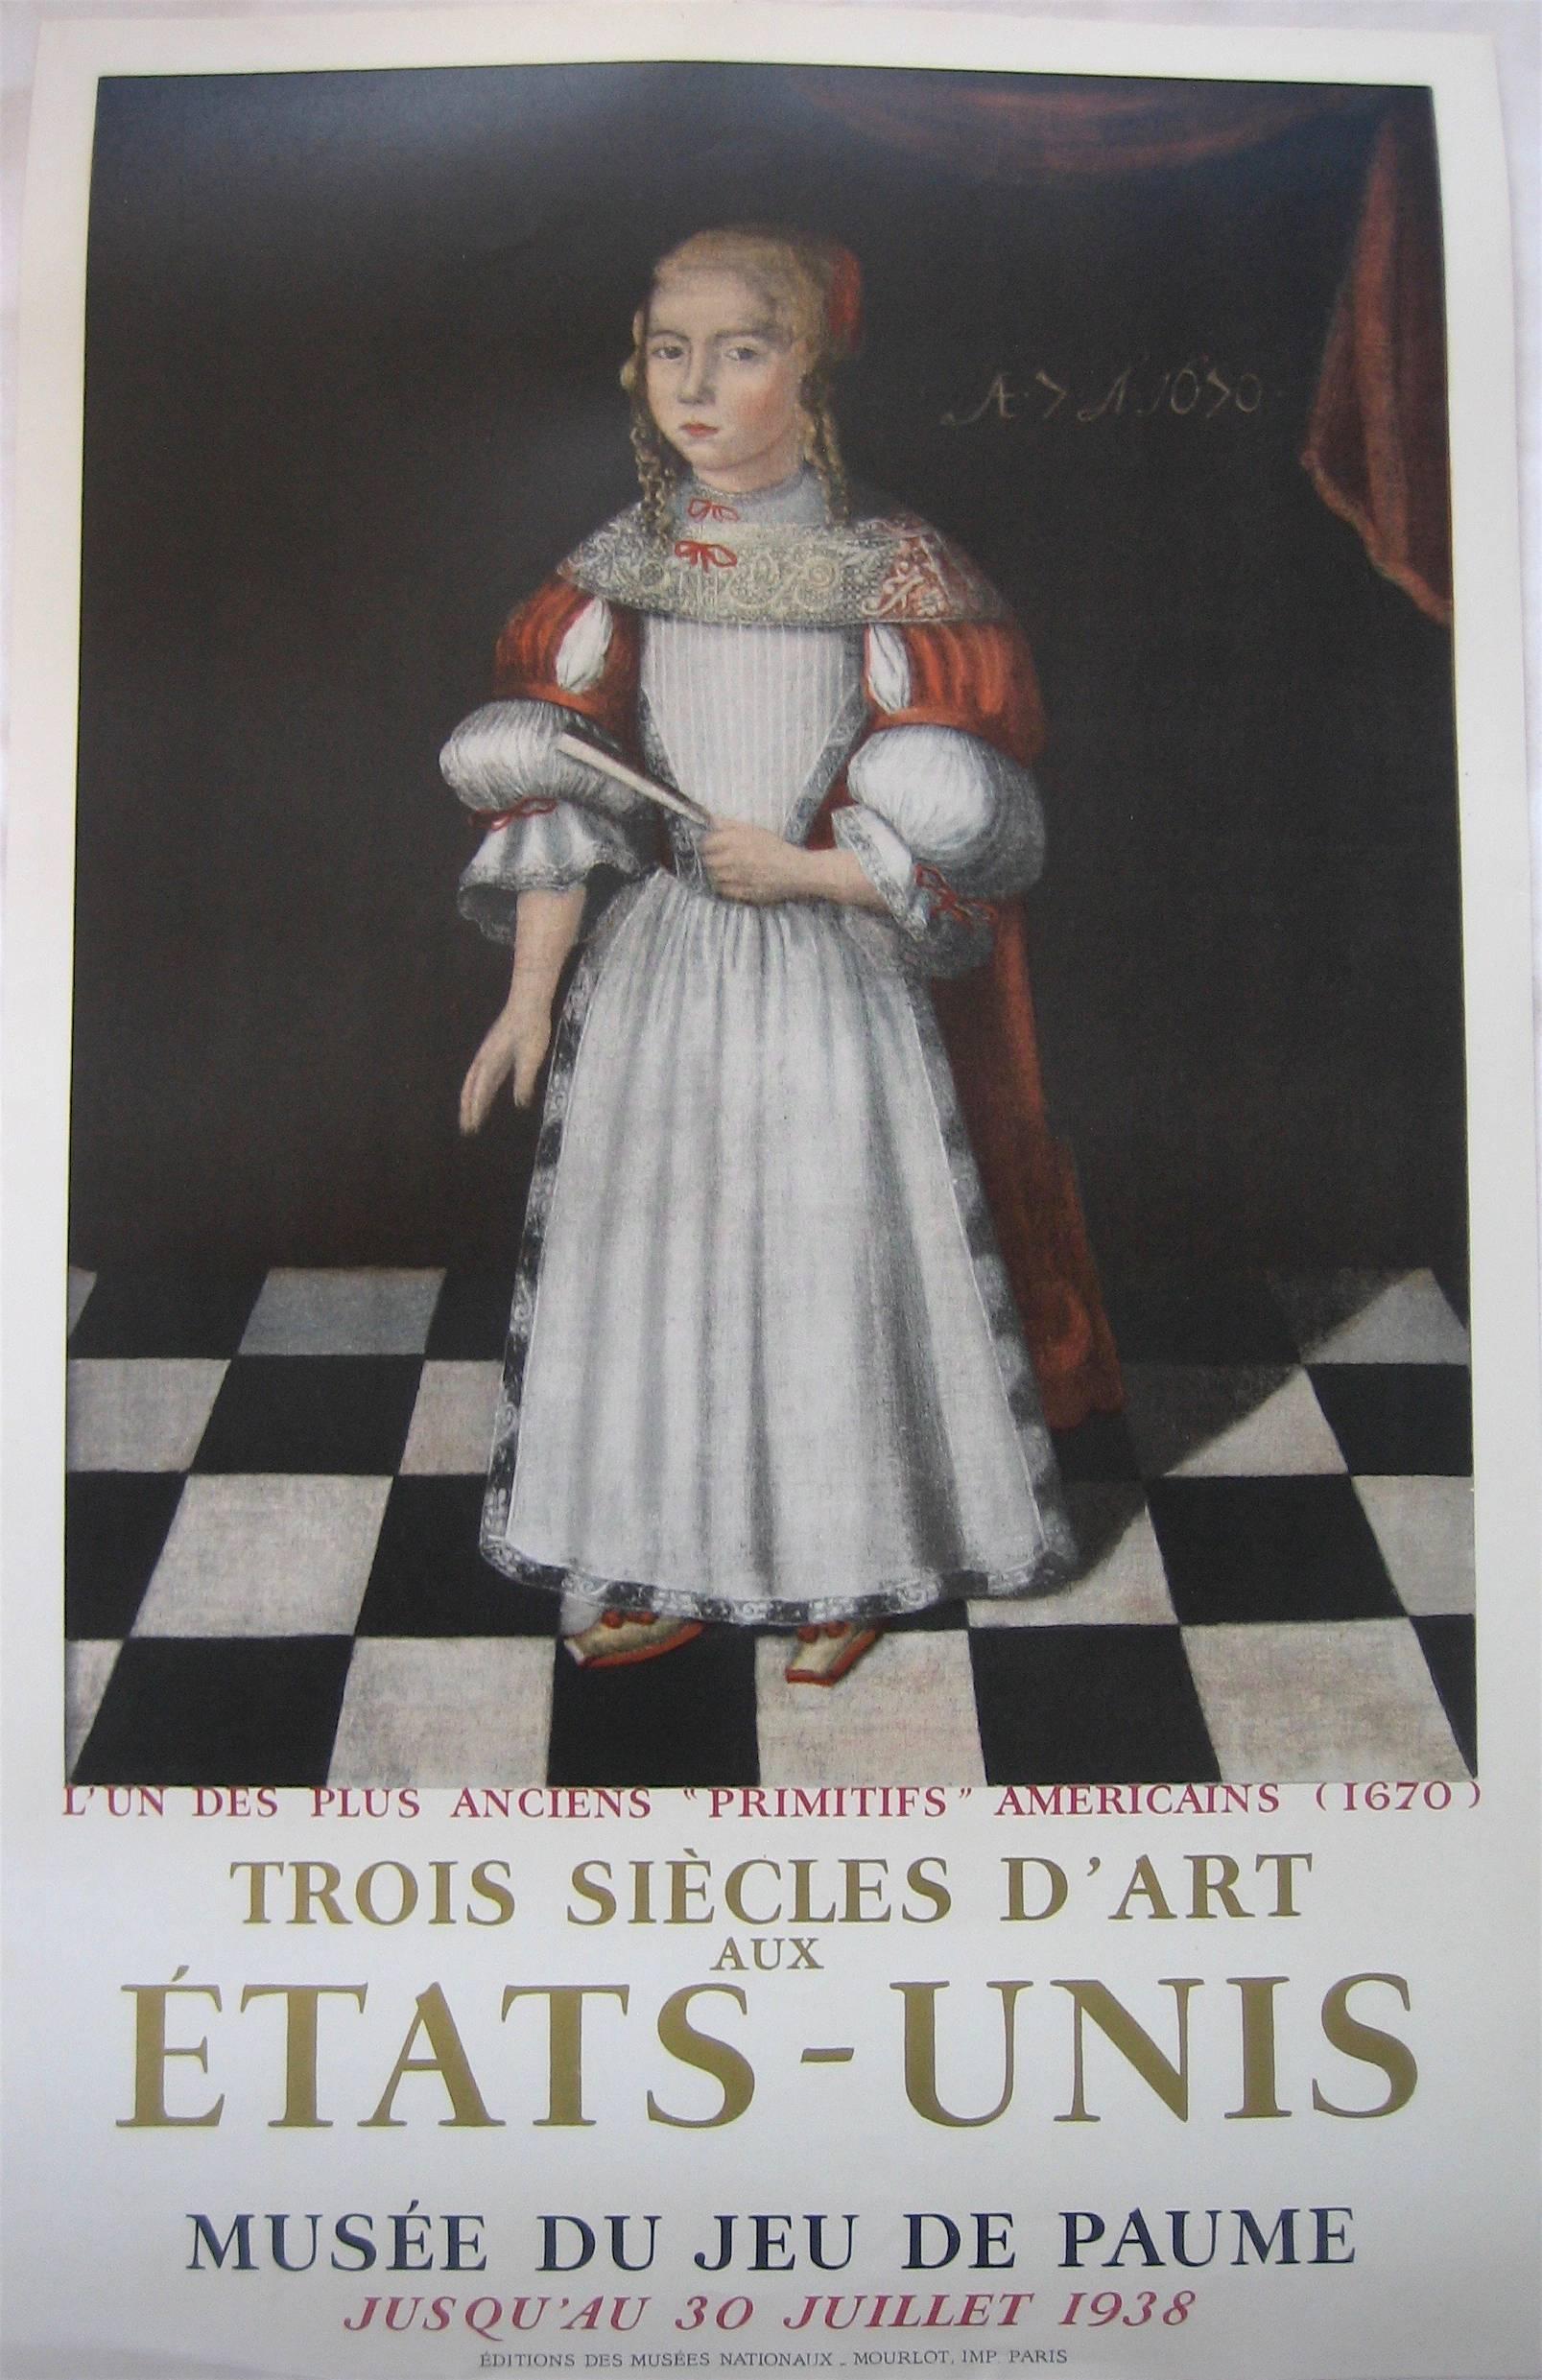 Framed lithographic exhibition poster of an American colonial portrait of Margaret Gibbs of Boston (1670) for the Museum of Modern Art's 1938 exhibition, Trois Siècles D'Art aux Etats-Unis (Three Centuries of American Art), at Musée du Jeu de Paume